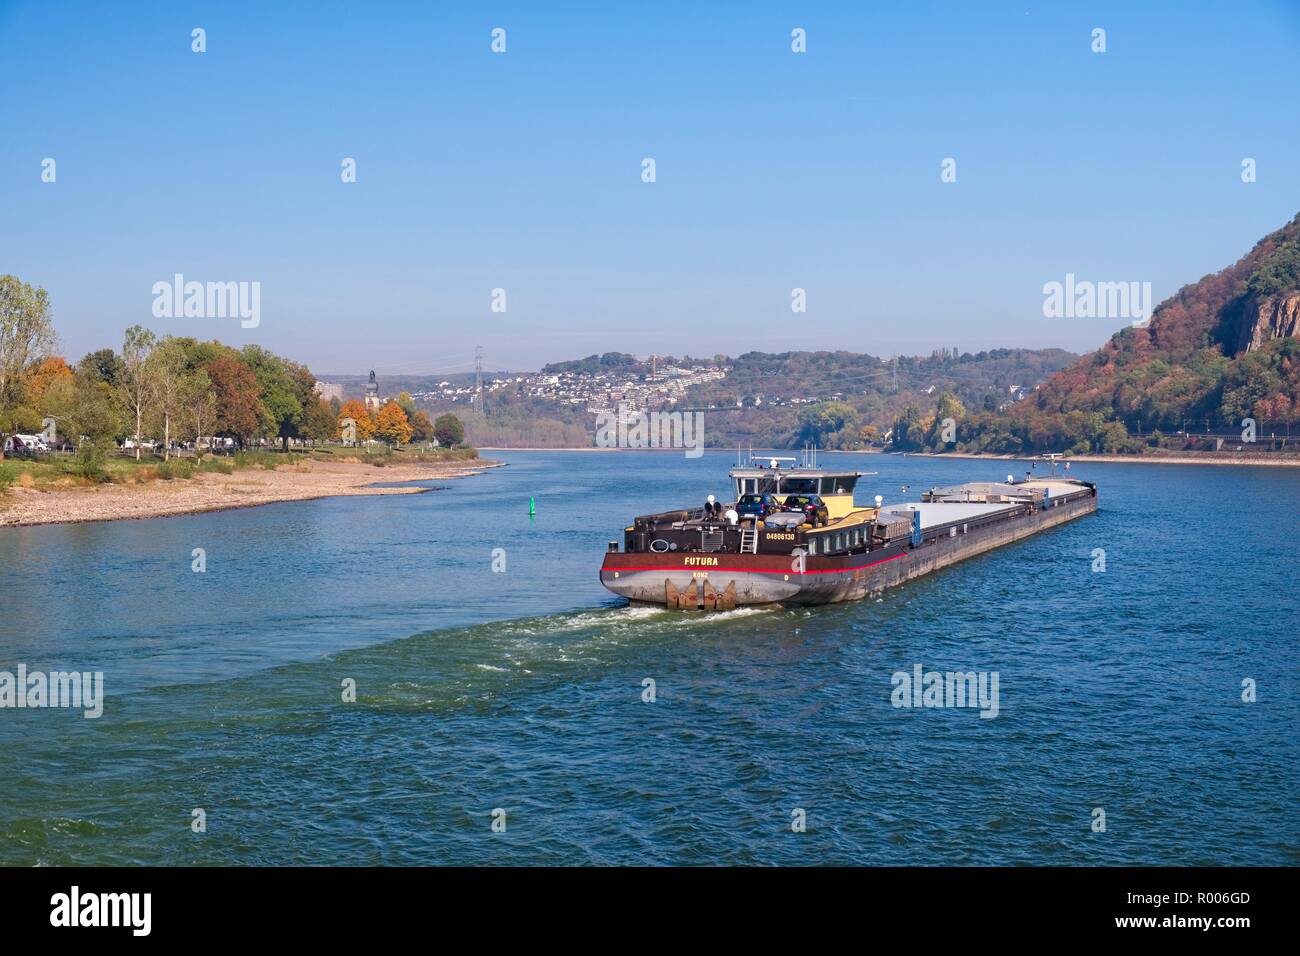 DOUBLE LENGTH BARGE EMERGING FROM THE MOSEL ON TO THE RIVER RHINE, KOBLENZ, GERMANY Stock Photo